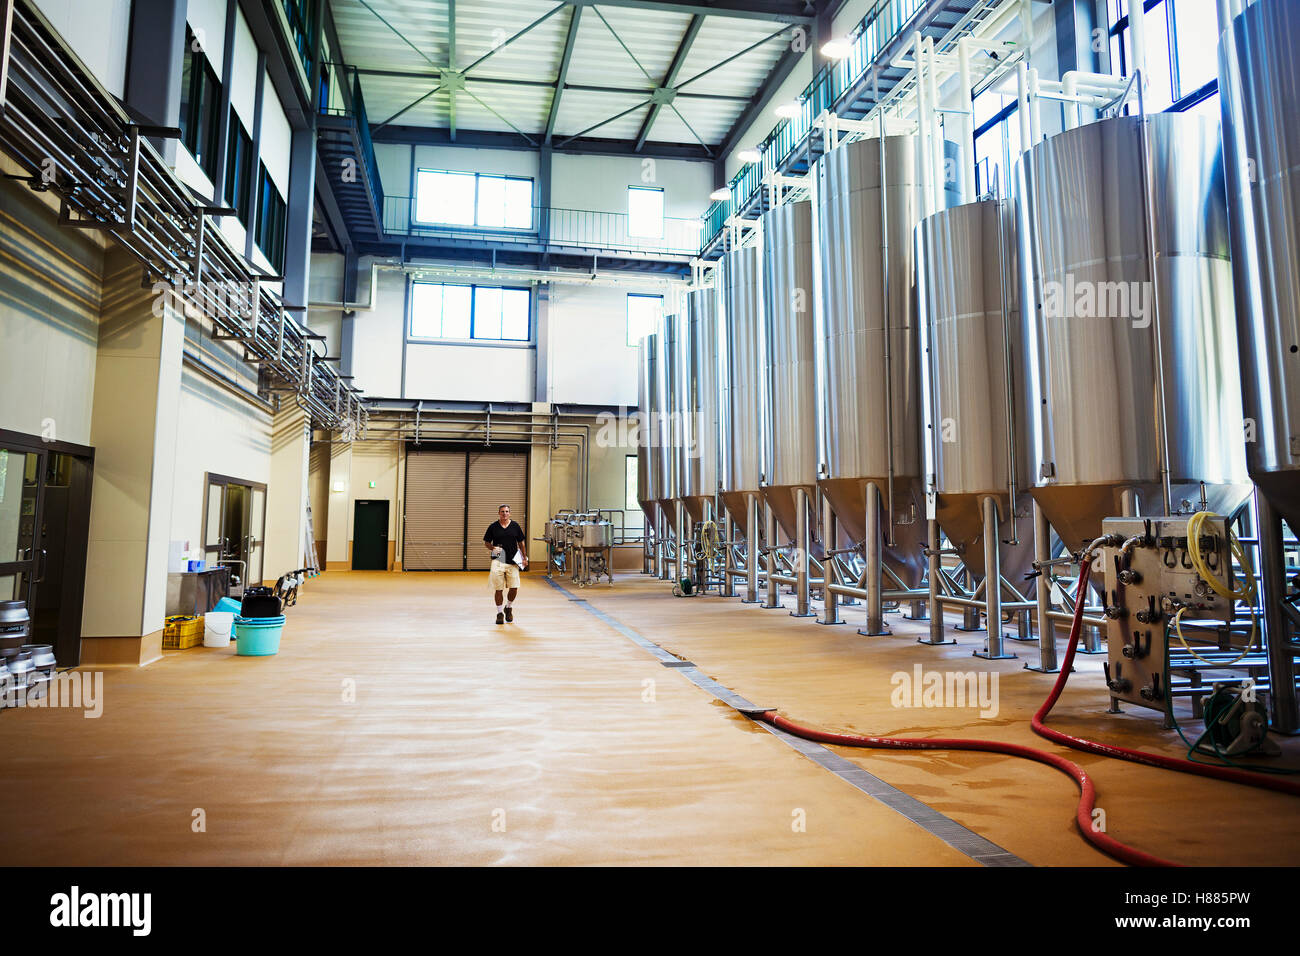 Interior view of a brewery with a row of metal beer tanks. Stock Photo